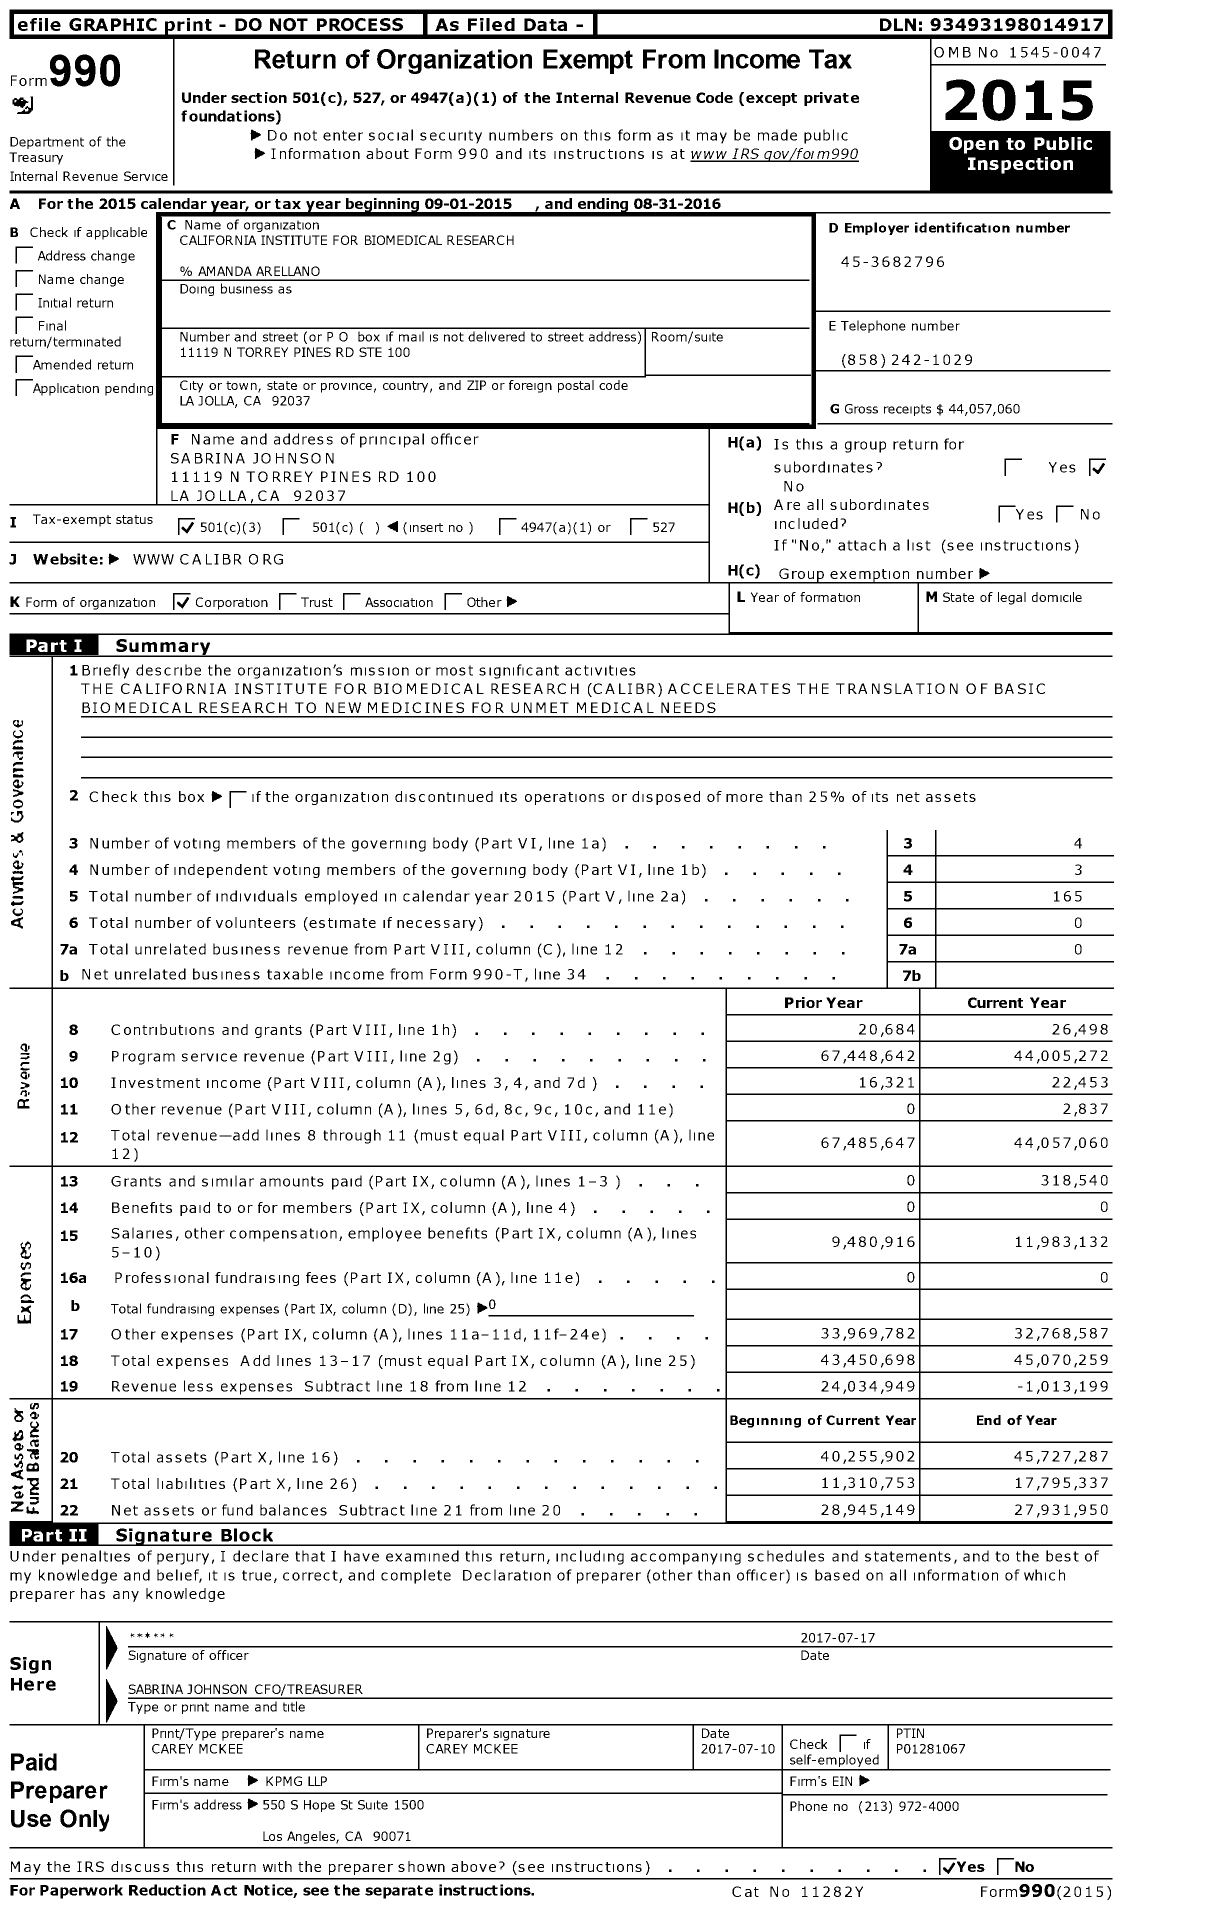 Image of first page of 2015 Form 990 for The California Institute for Biomedical Research (Calibr)